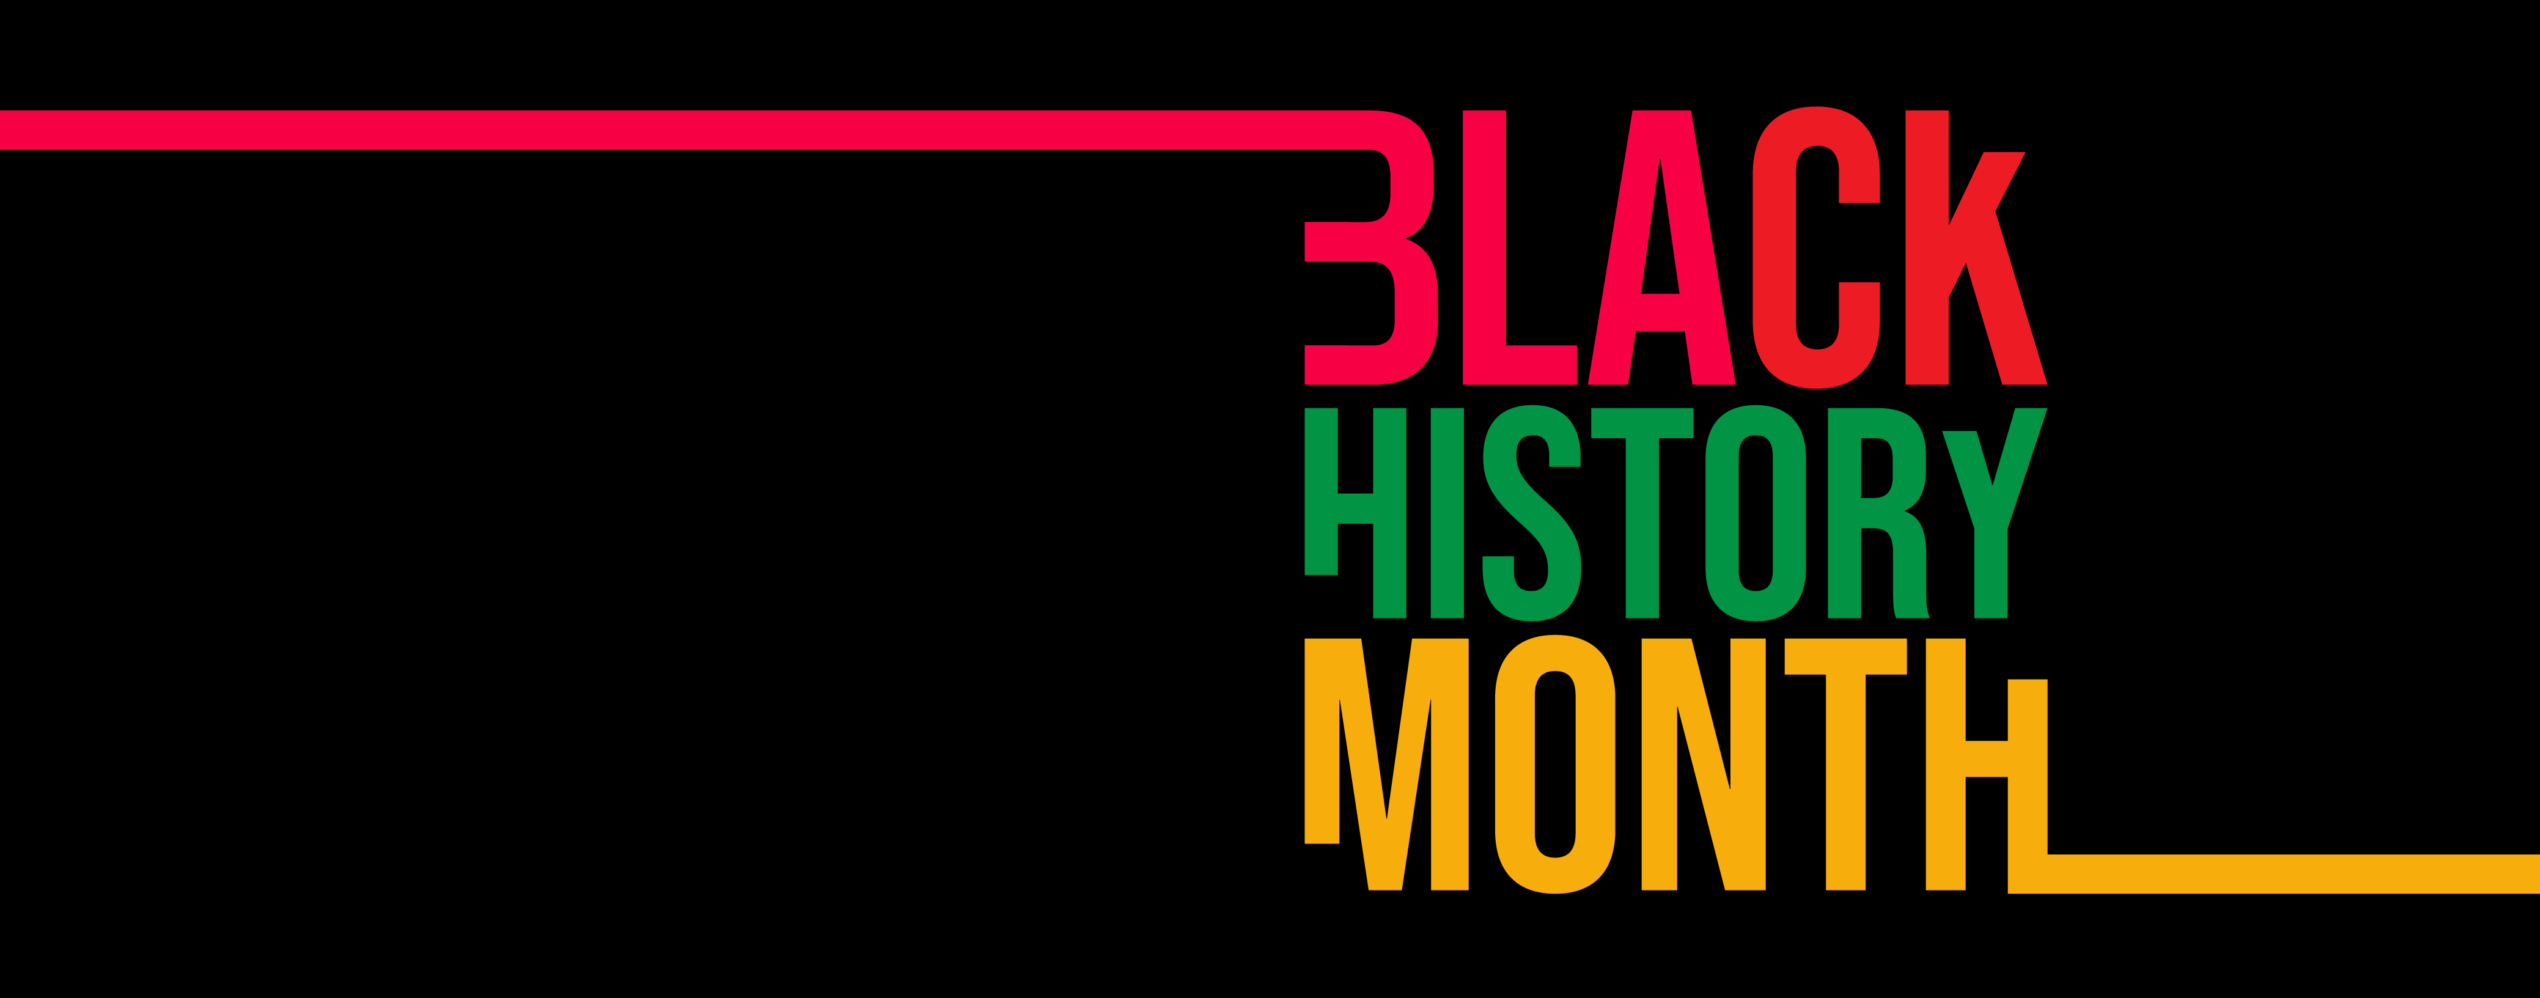 What Black History Month Means to Me National Health Council